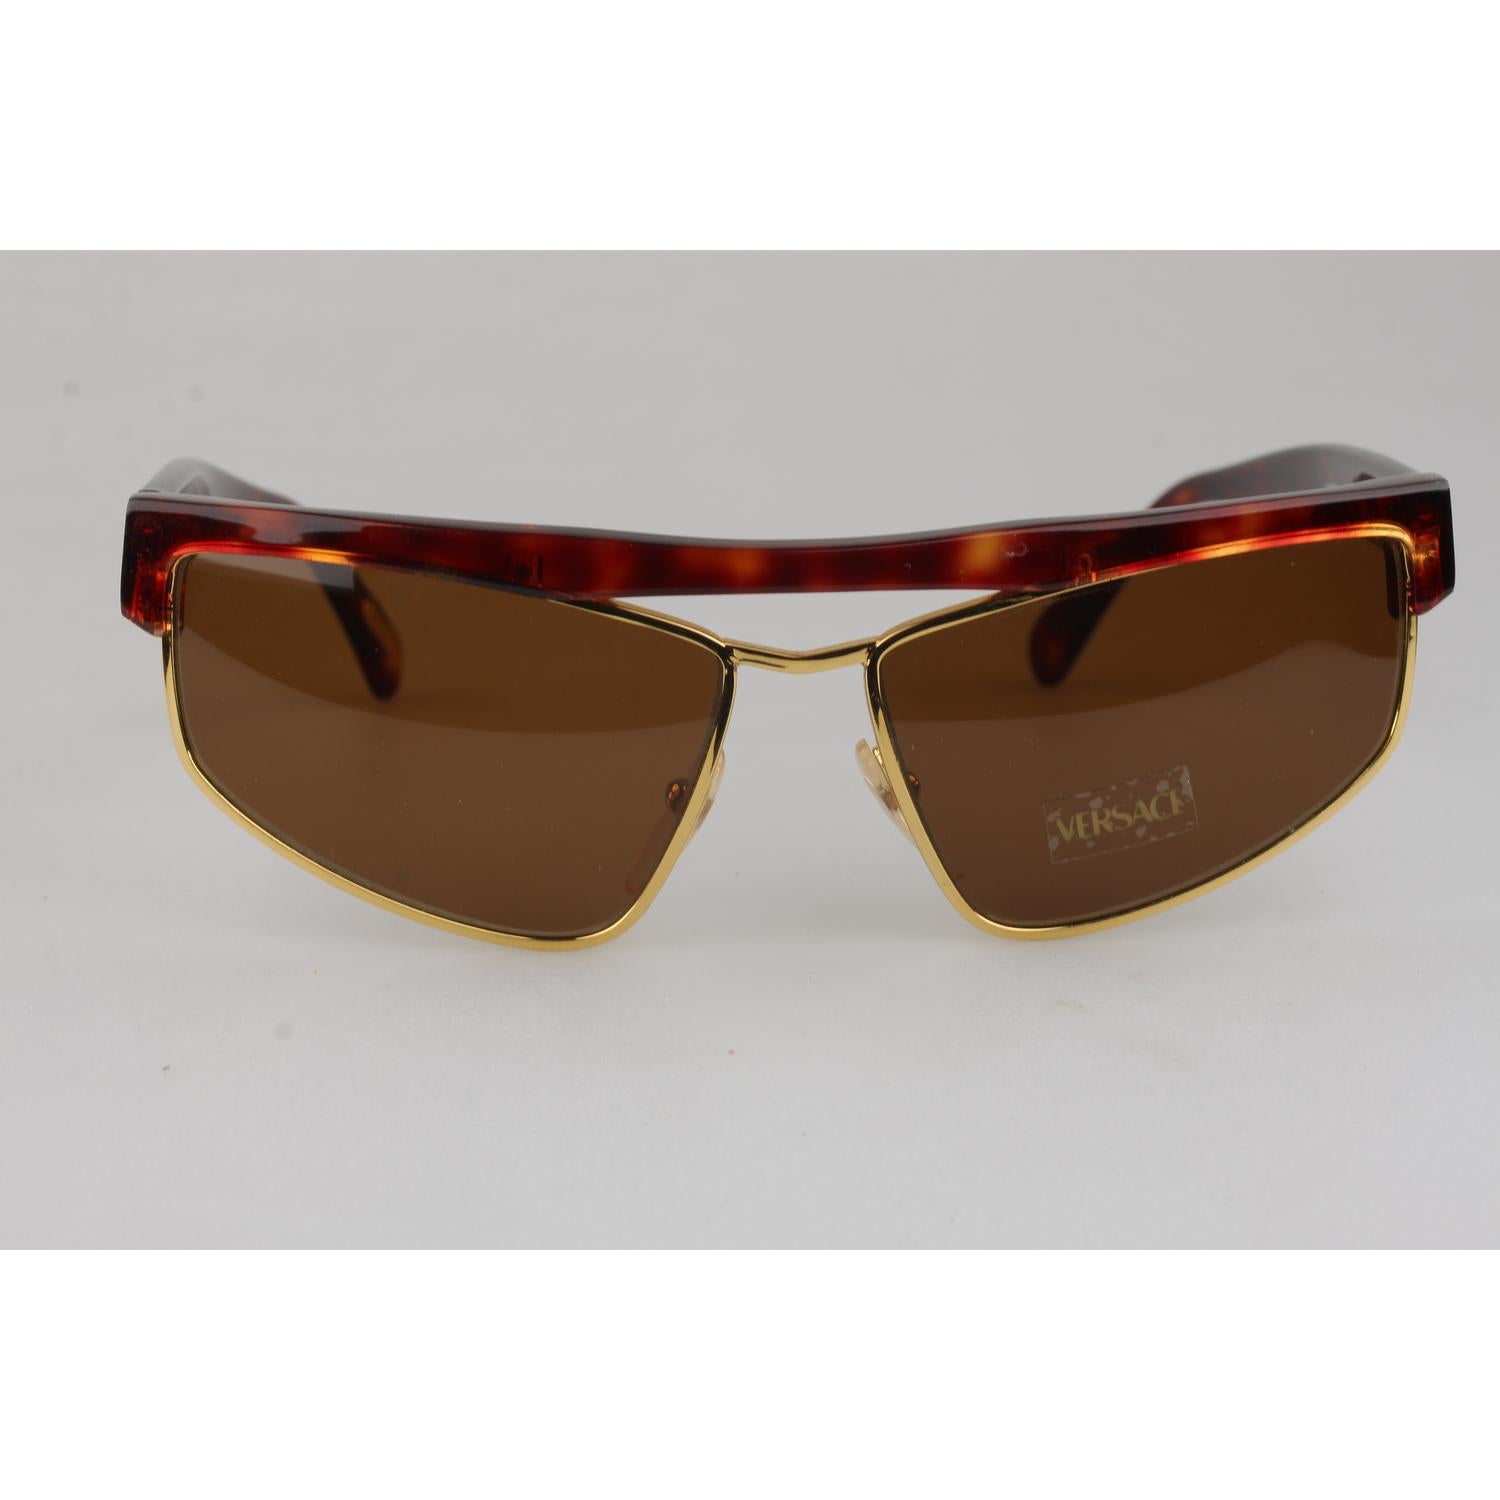 Tortoise brown, cat-eye rectangular shaped vintage sunglasses by Gianni Versace. From the 1980s, with gold metal accents and Gianni Versace 100% Total UVA UVB protection original lenses (sticker / label attached).
MATERIAL: Acetate

COLOR: